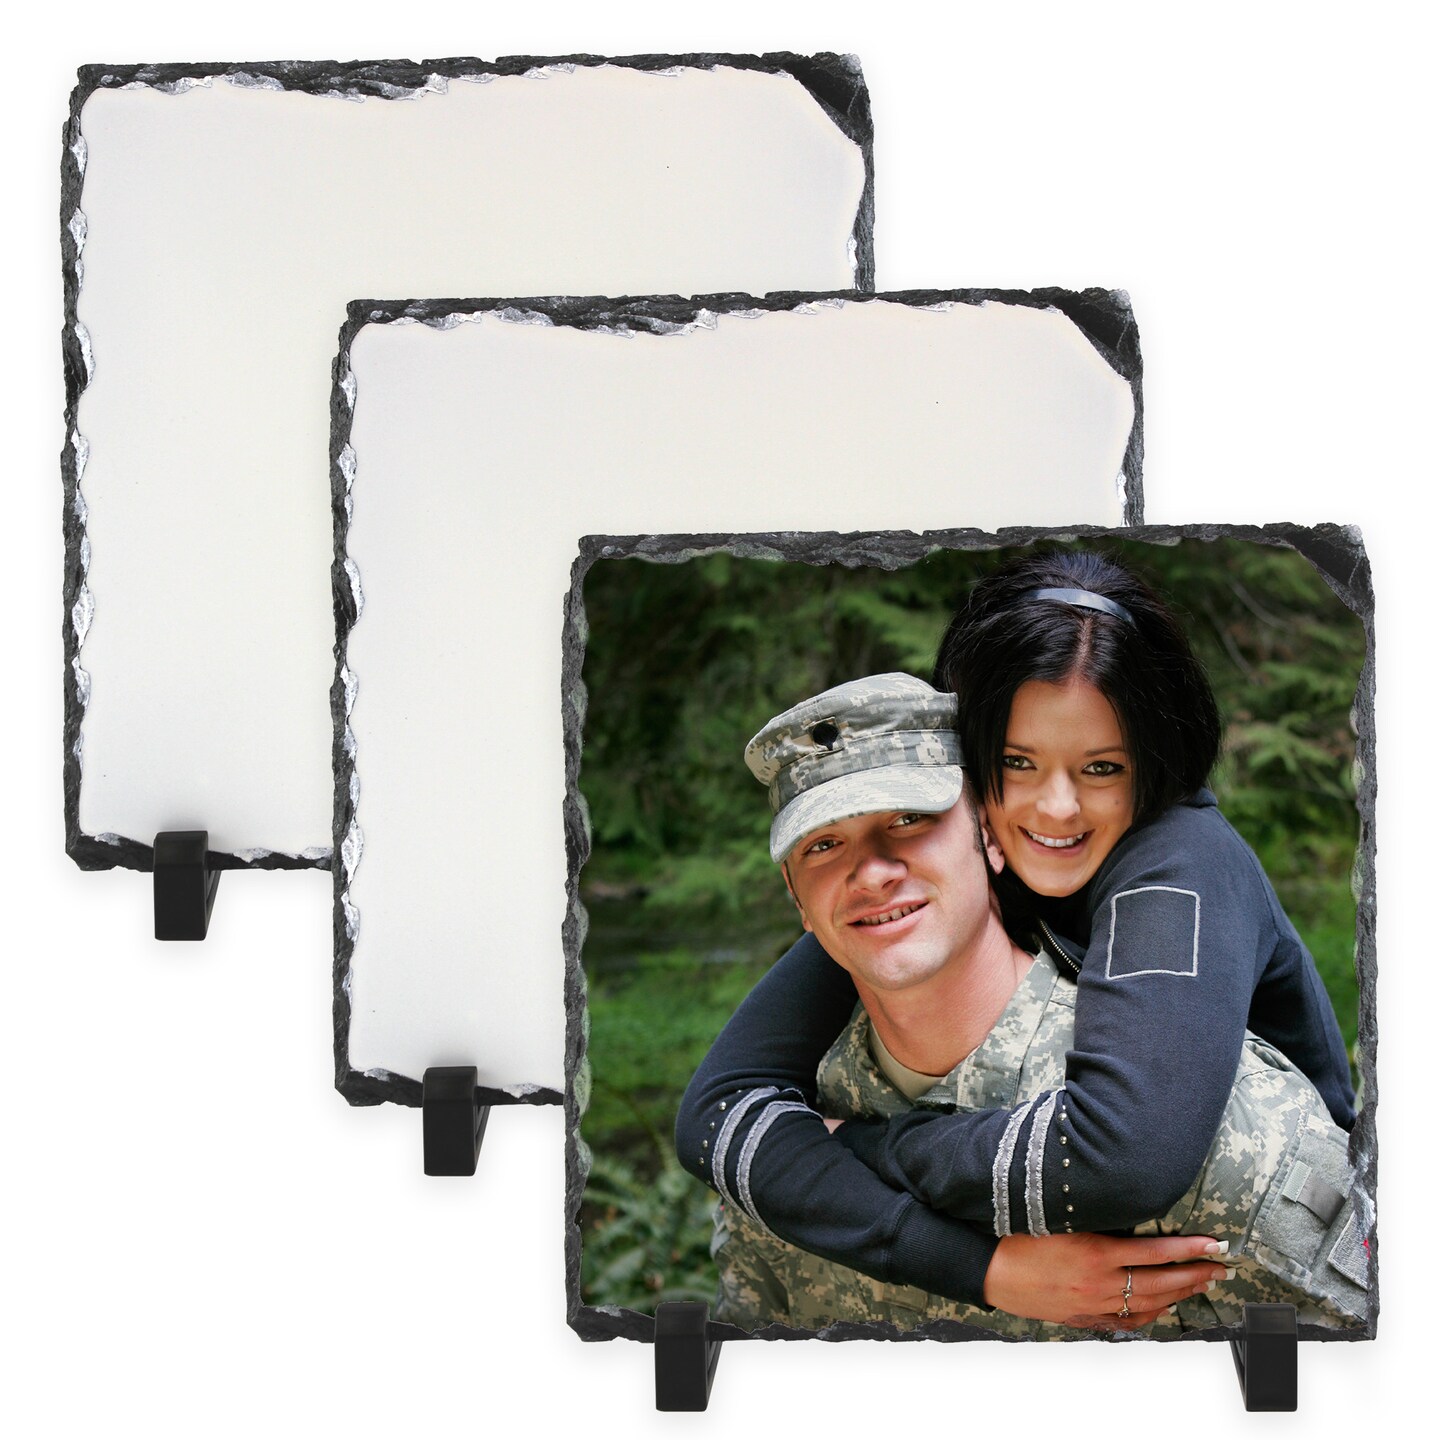 SubliSLATE Sublimation Slate Blank, Clock. Includes Black Display Feet for  Photo Quality Sublimation Printing with Clock Mechanism